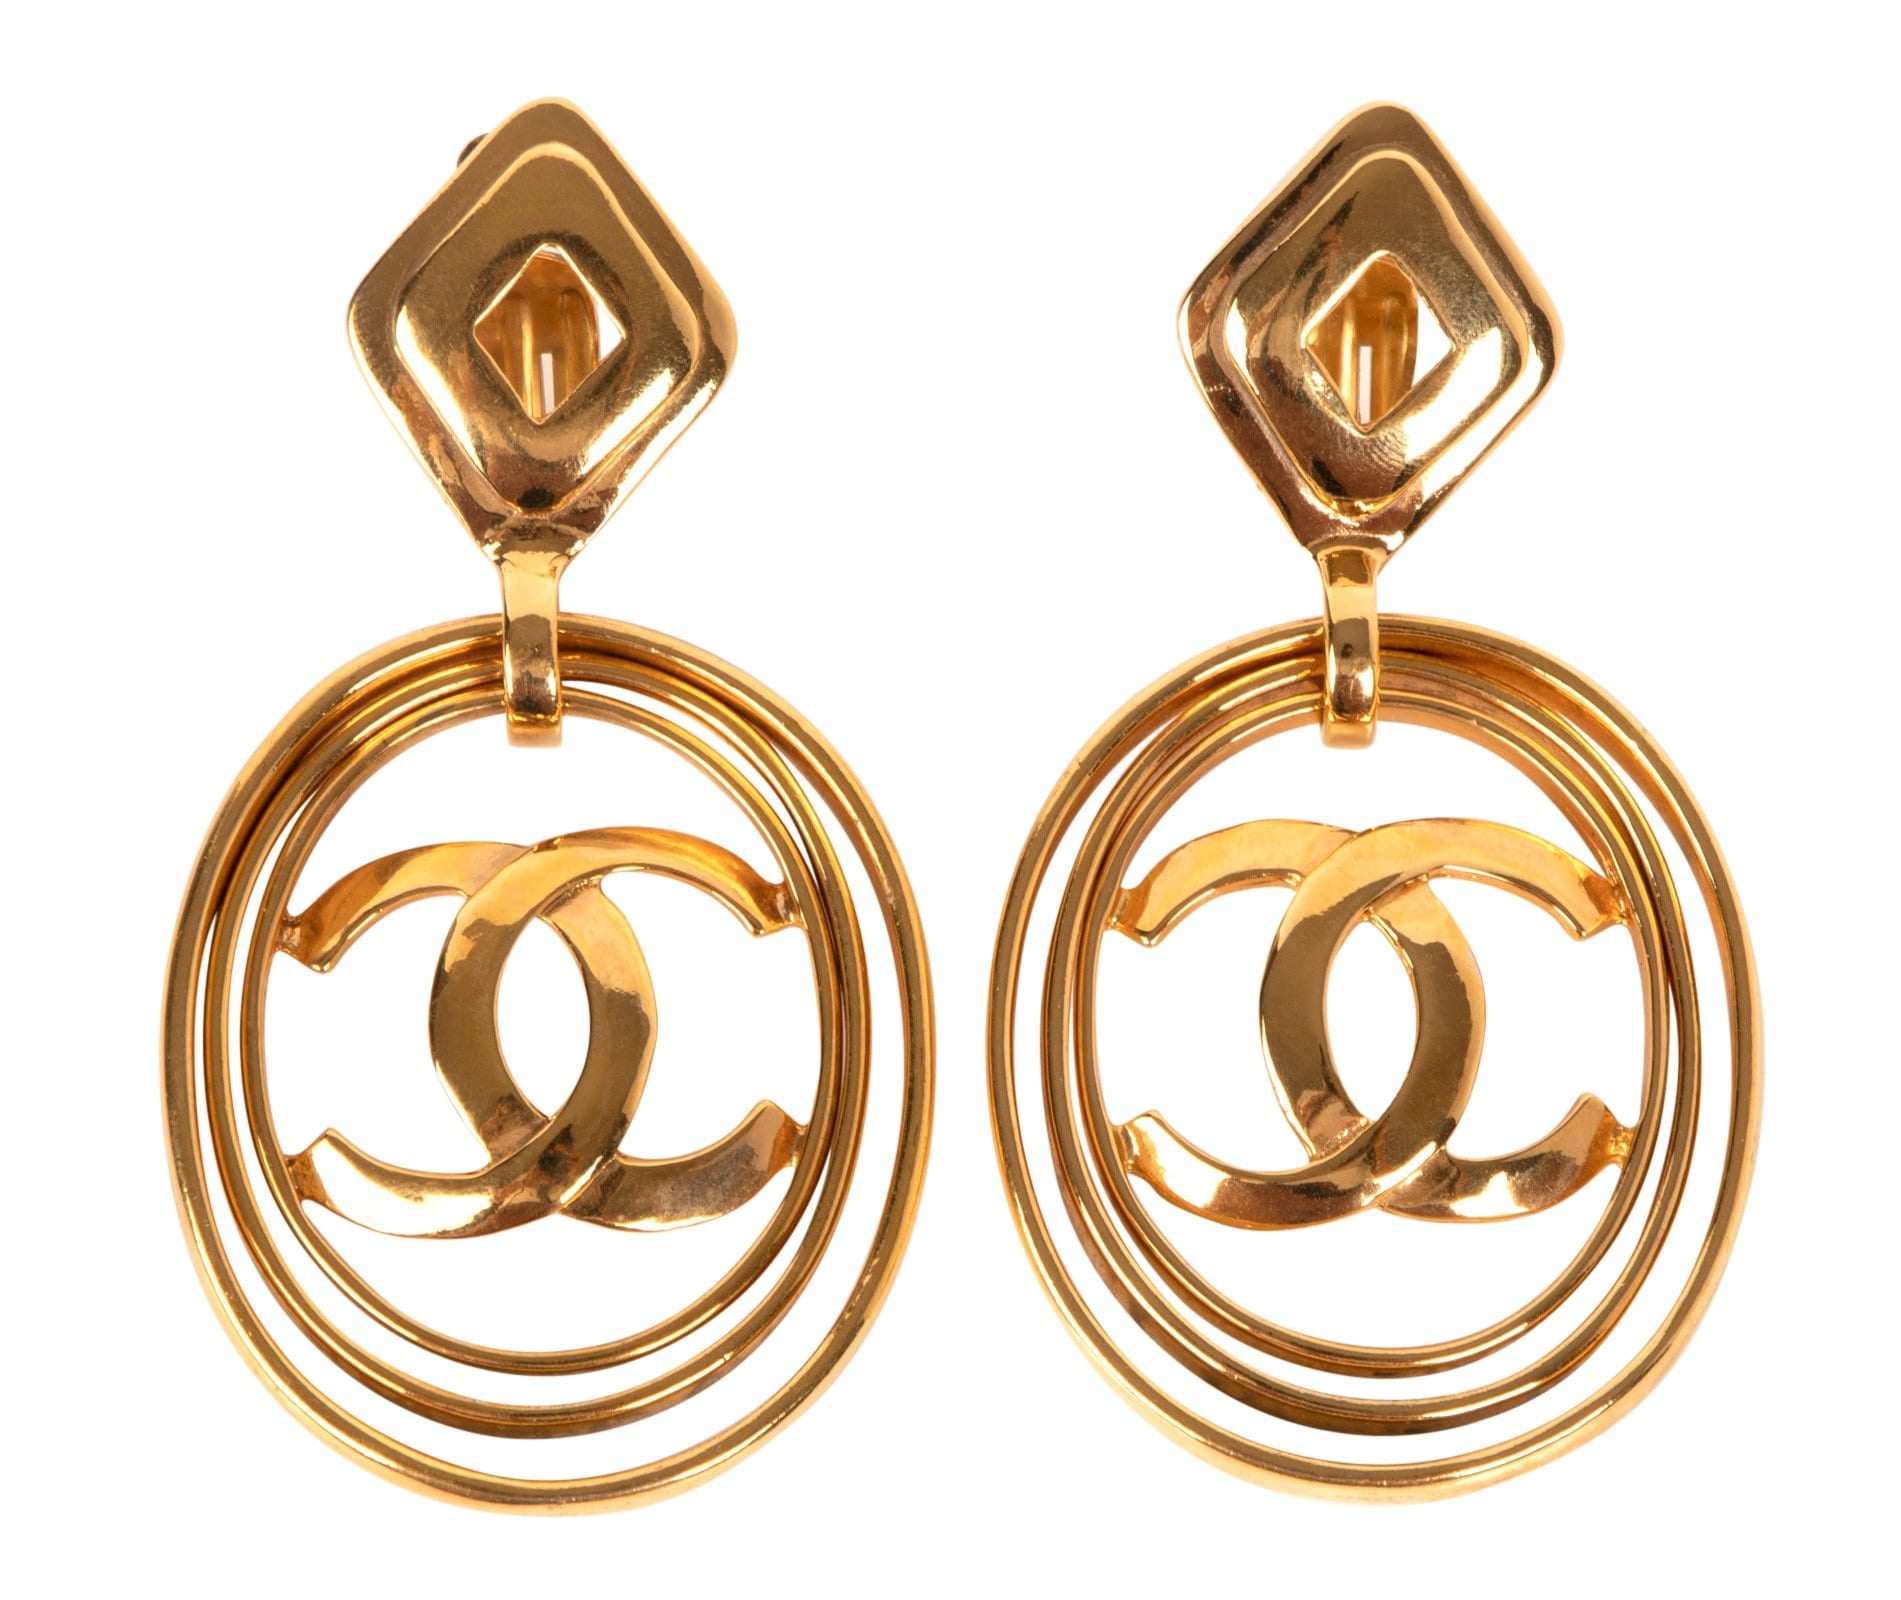 Chanel Earrings Vintage Hoops Worn 3 Ways Bold And Fabulous Rare - mightychic